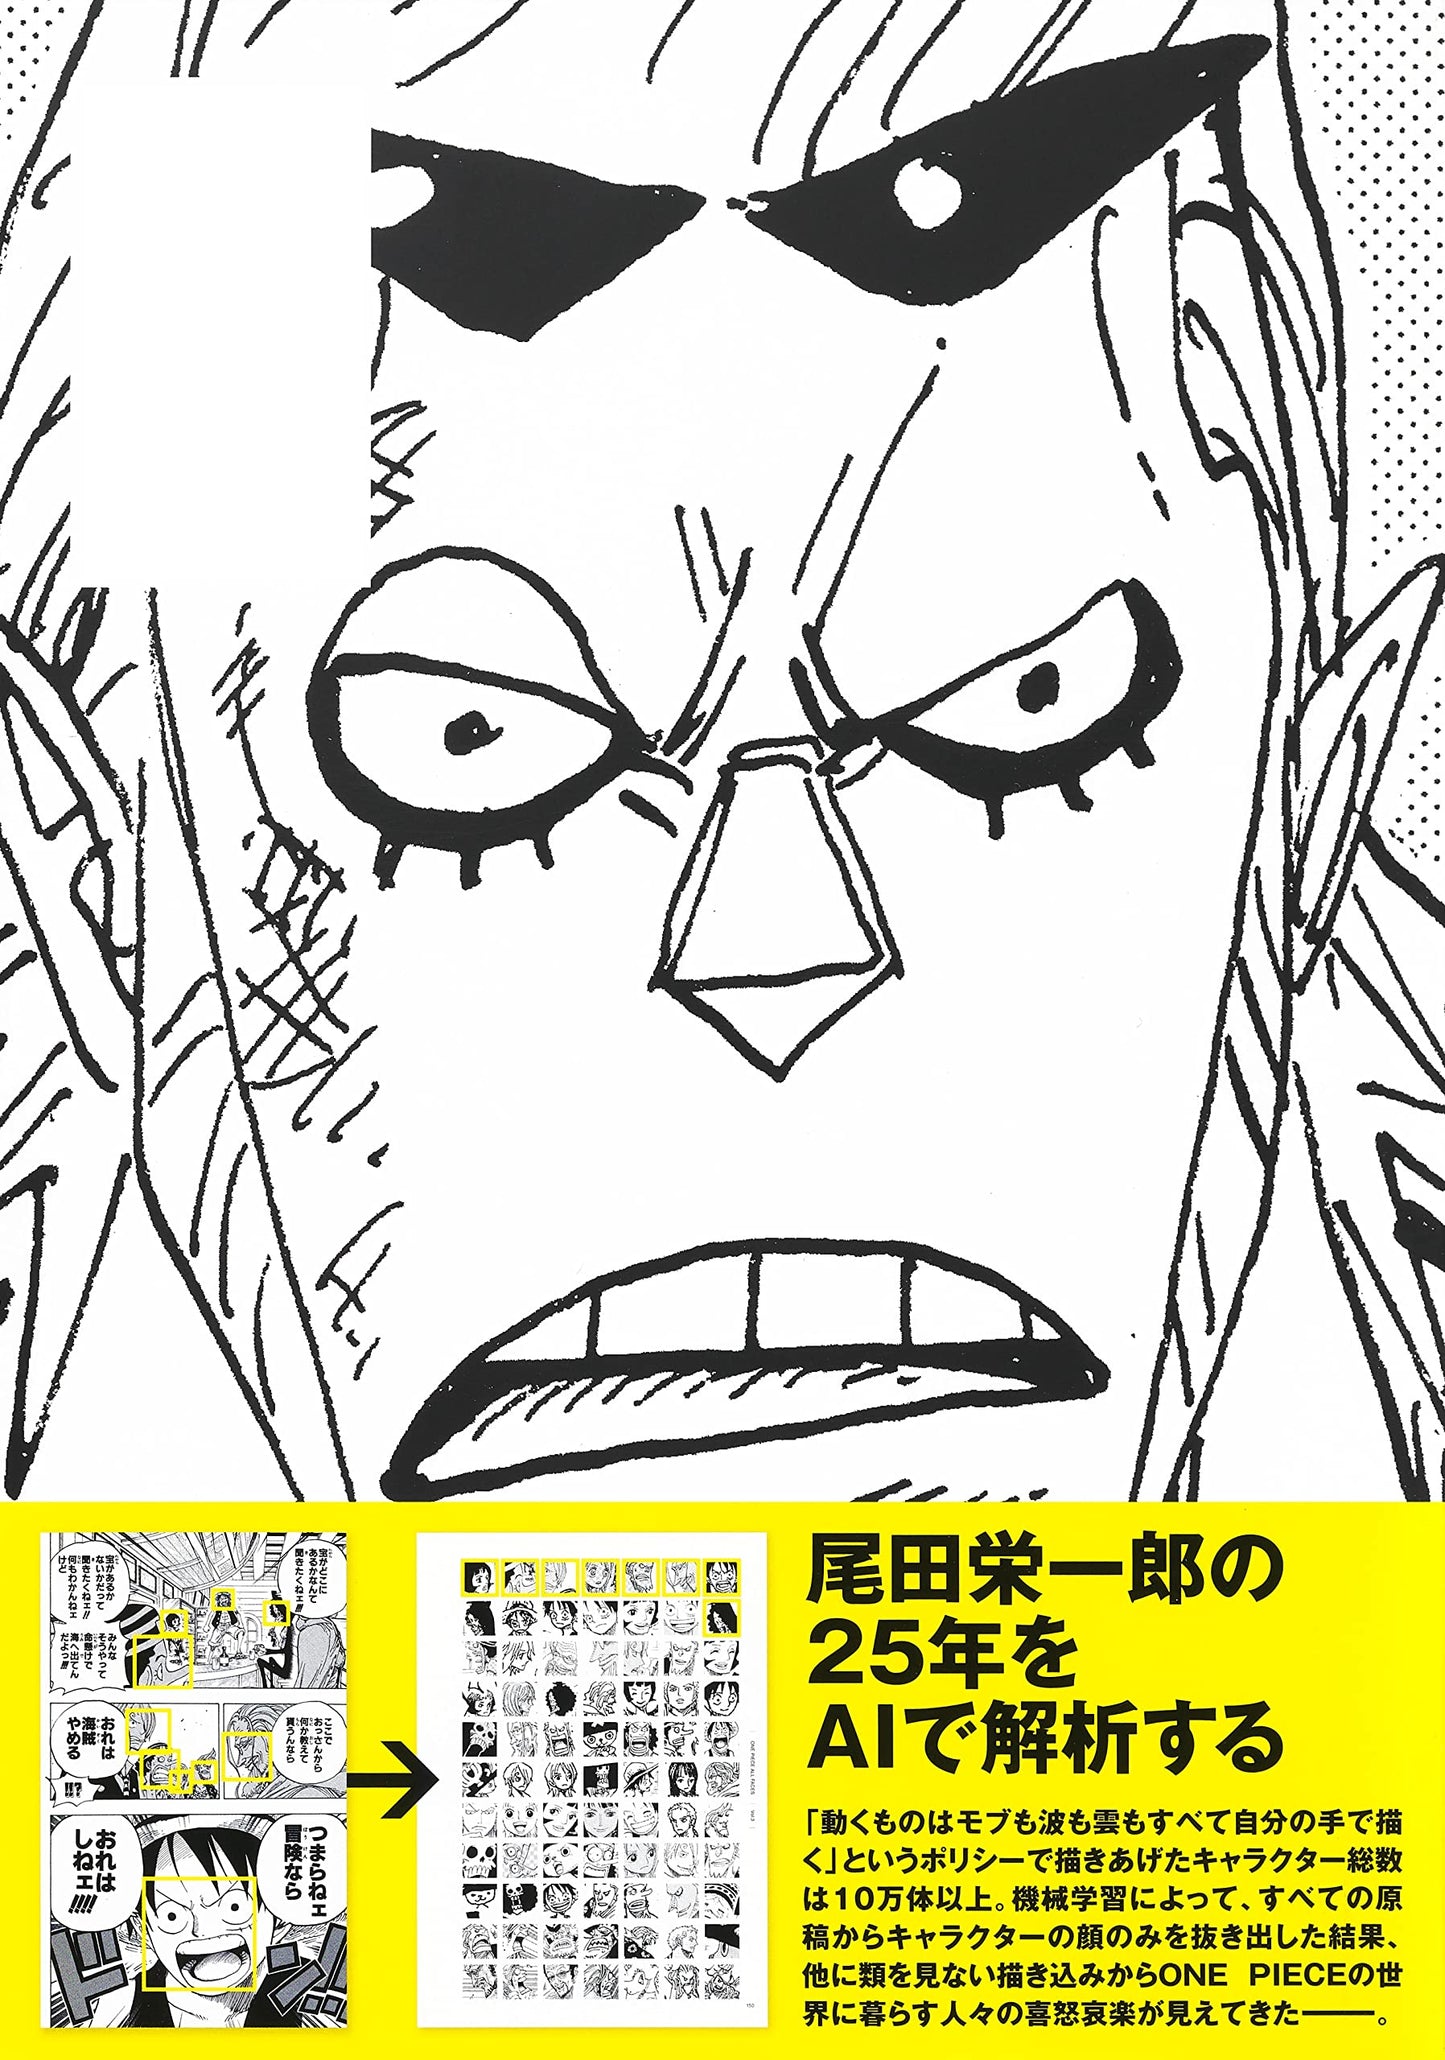 One Piece  - All Faces 3